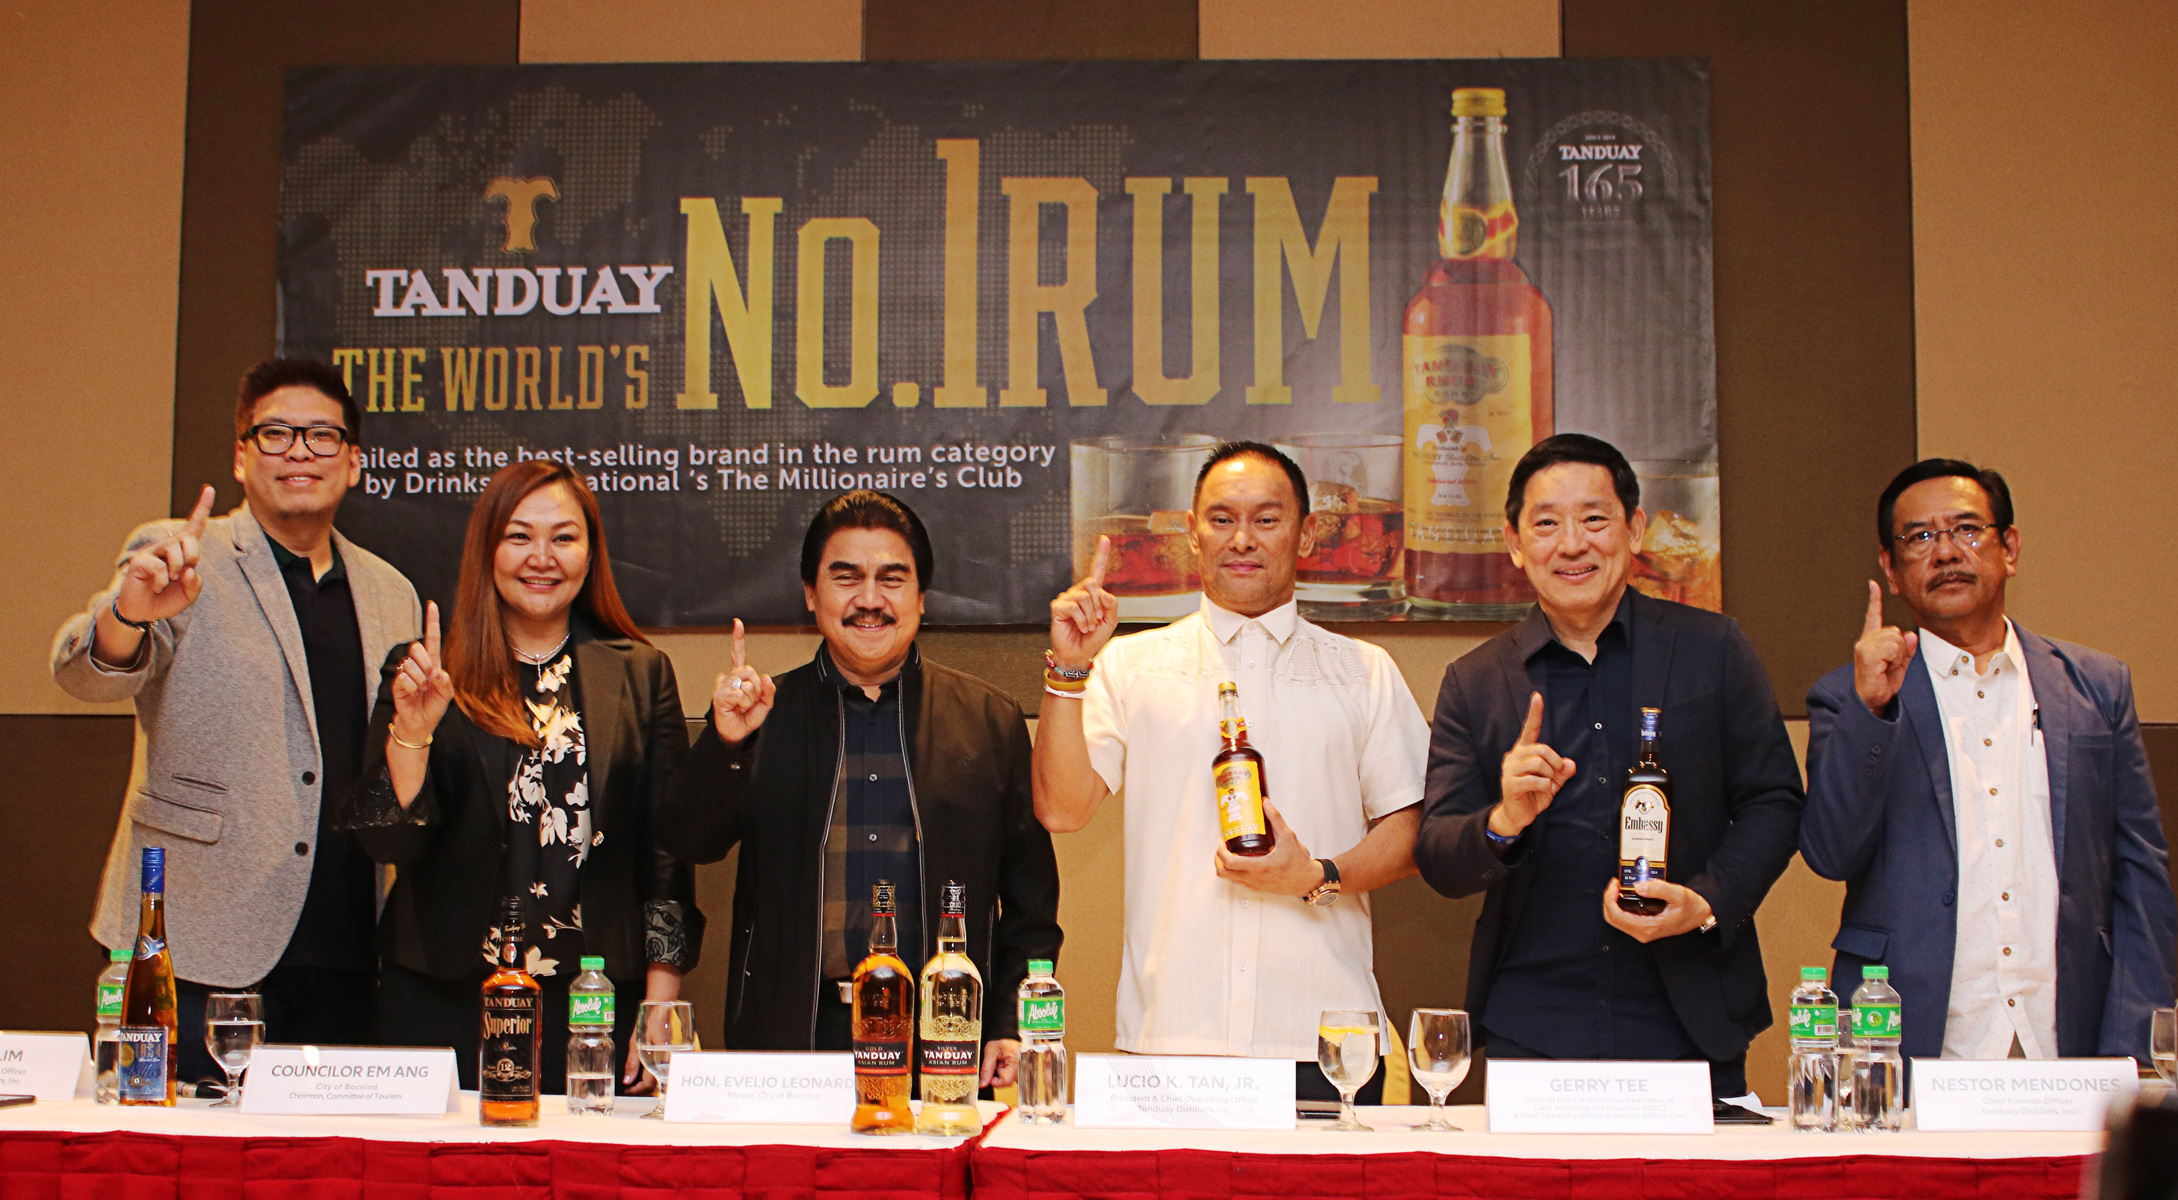 Tanduay is the world’s No. 1 Rum for second straight year